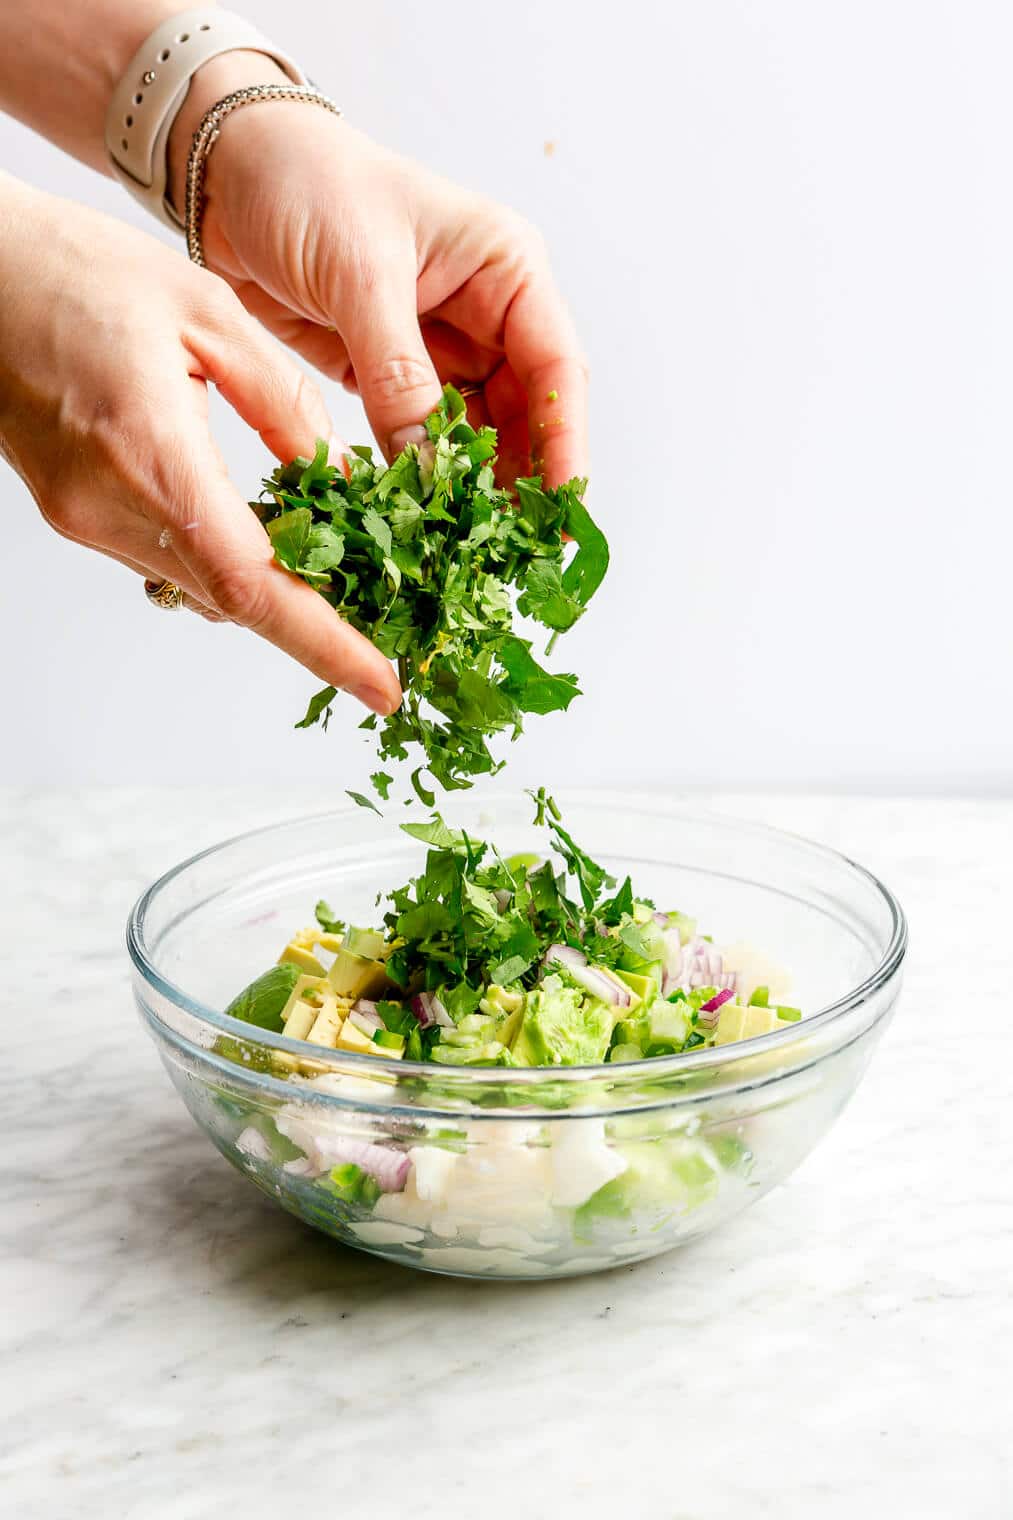 Hand dropping chopped cilantro into a large glass bowl with cubed white fish and veggies.